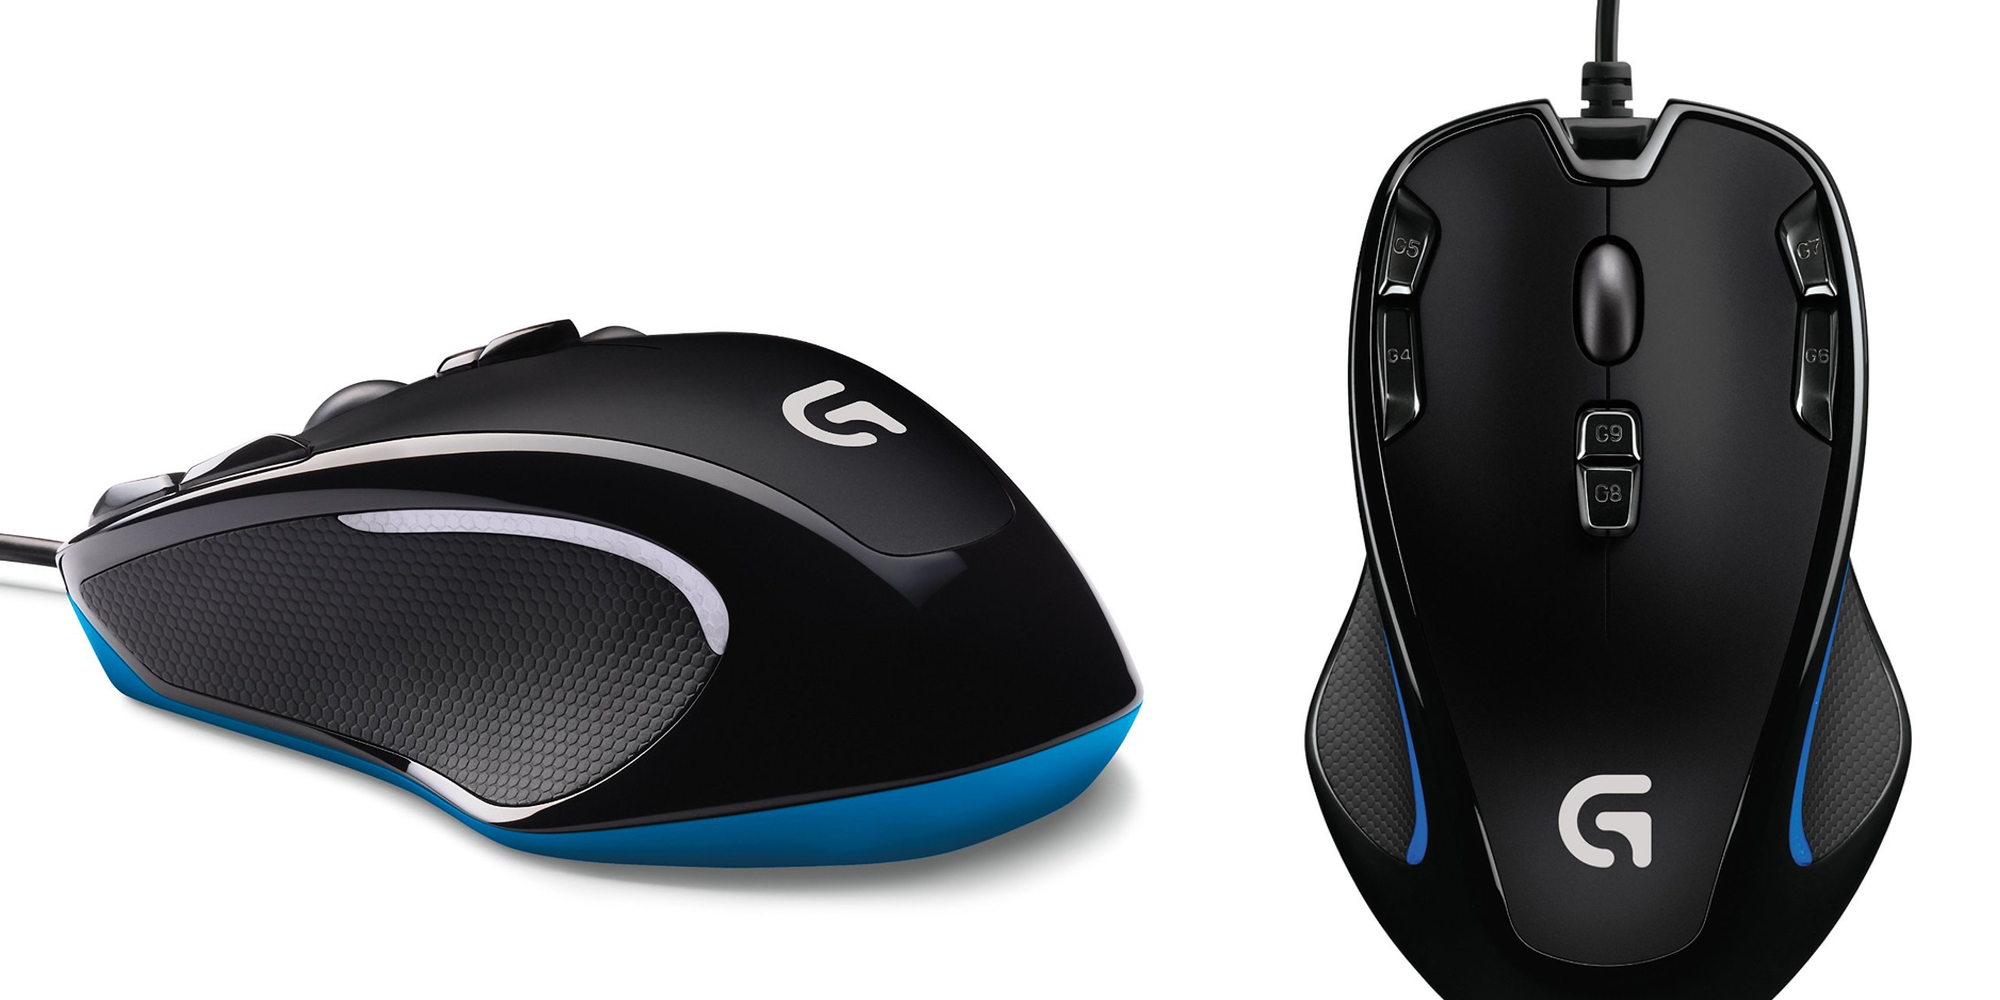 Logitech G300s Optical Gaming Mouse drops to $20 (Reg. $28) - 9to5Toys